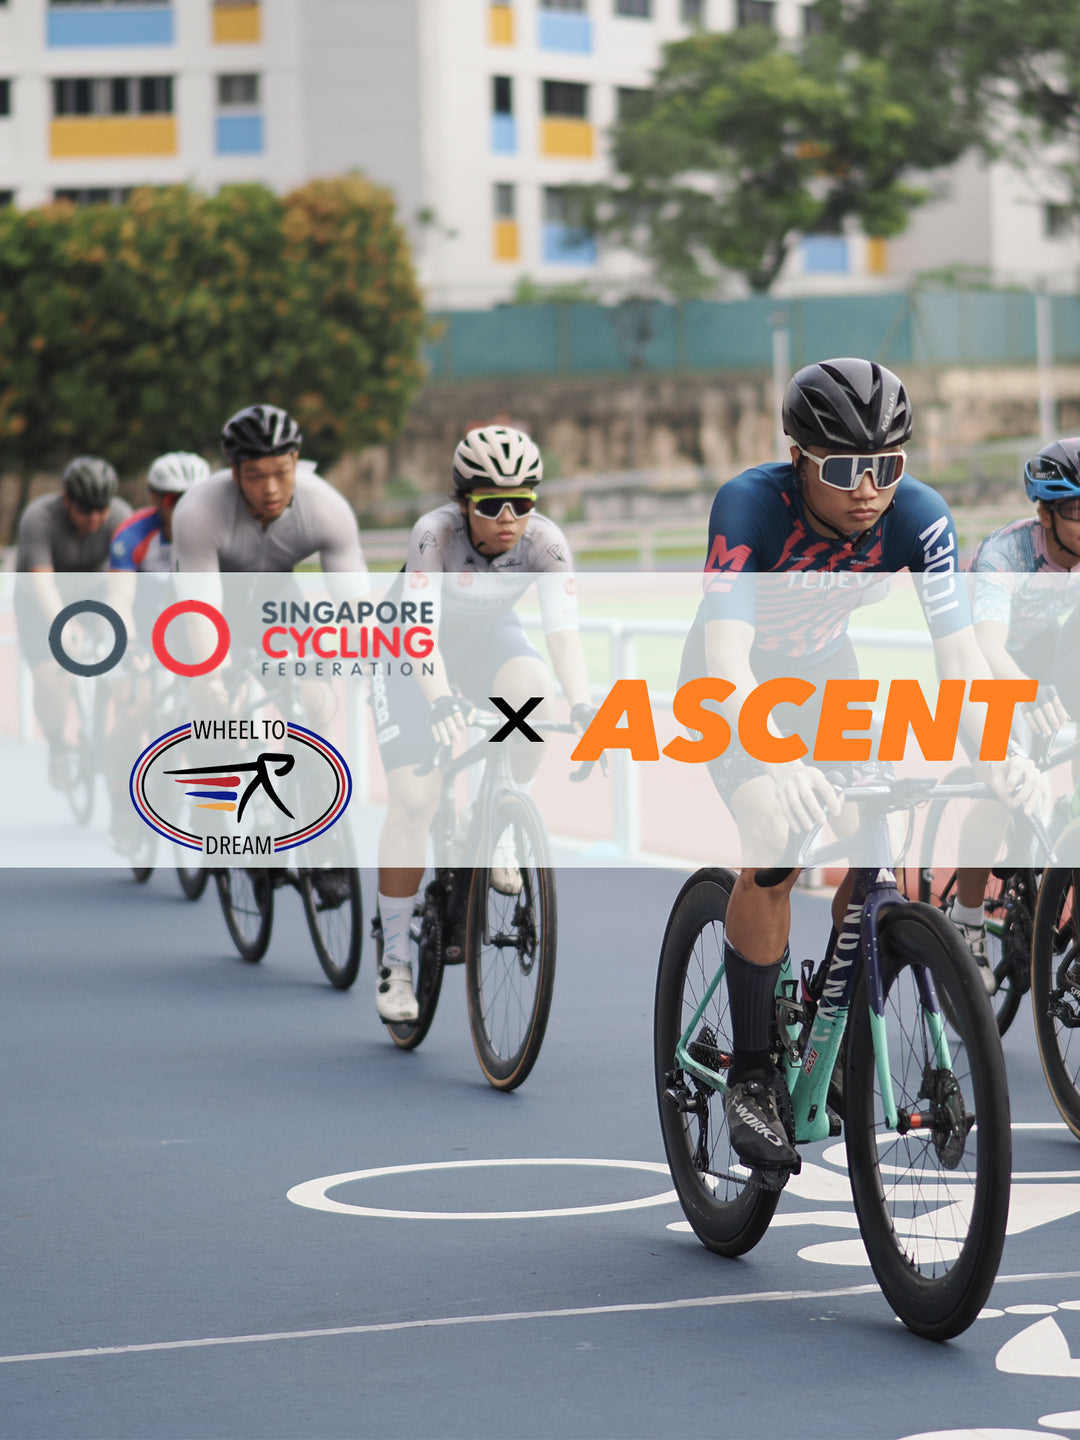 ASCENT x WHEEL TO DREAM: Inspiring a new generation of cyclists